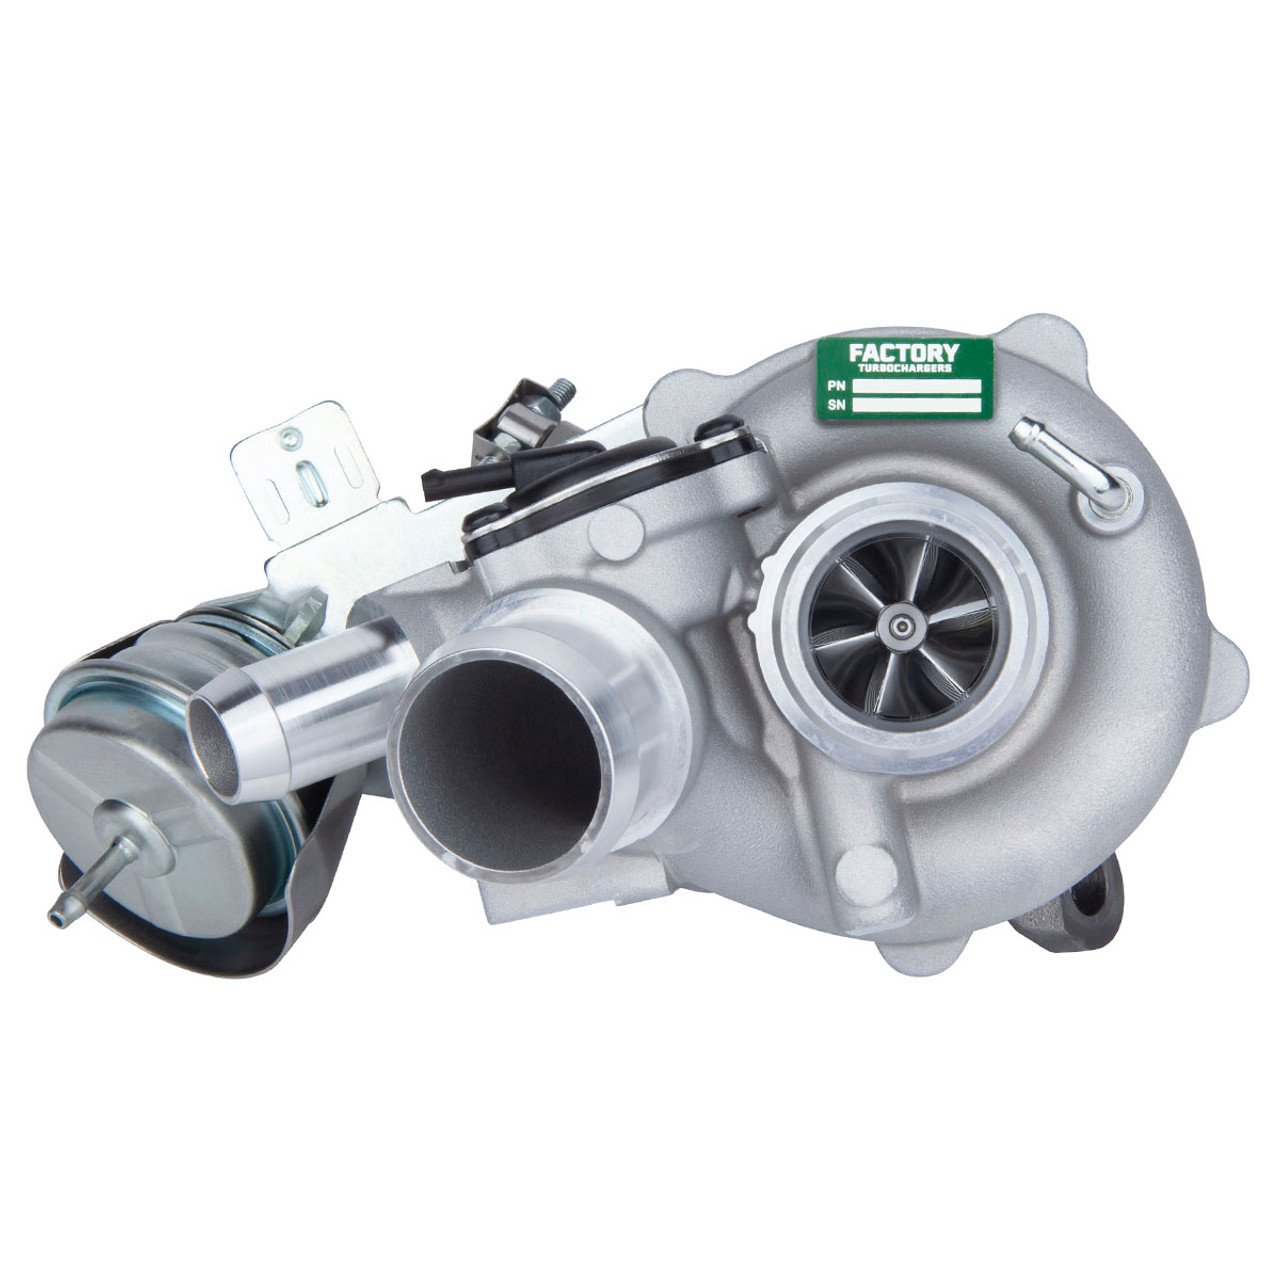 Replacement Driver Side Left Turbocharger fits Ford (also fits p n 014TC24020000) - 1